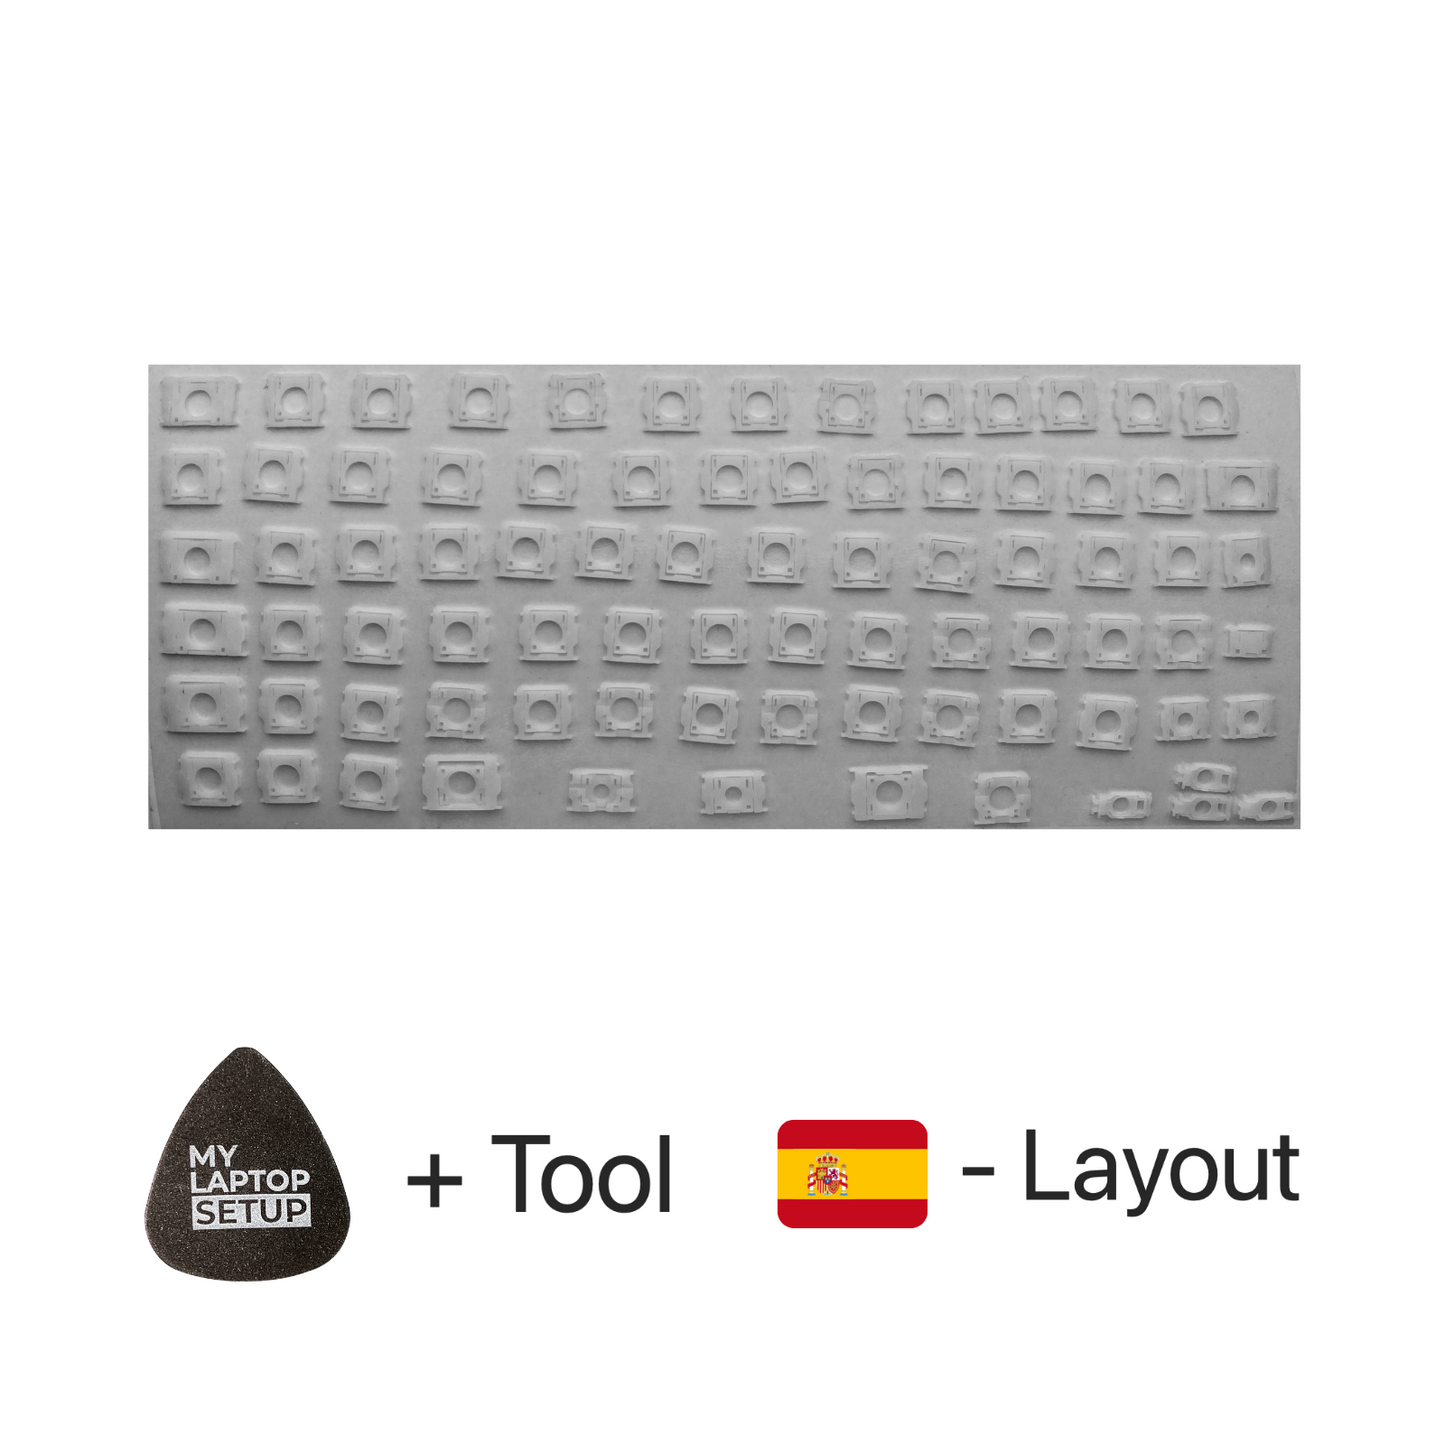 Replacement Keys & Hinges for MacBook Pro/Air Spanish 🇪🇸 ES-Layout QWERTY (all models)